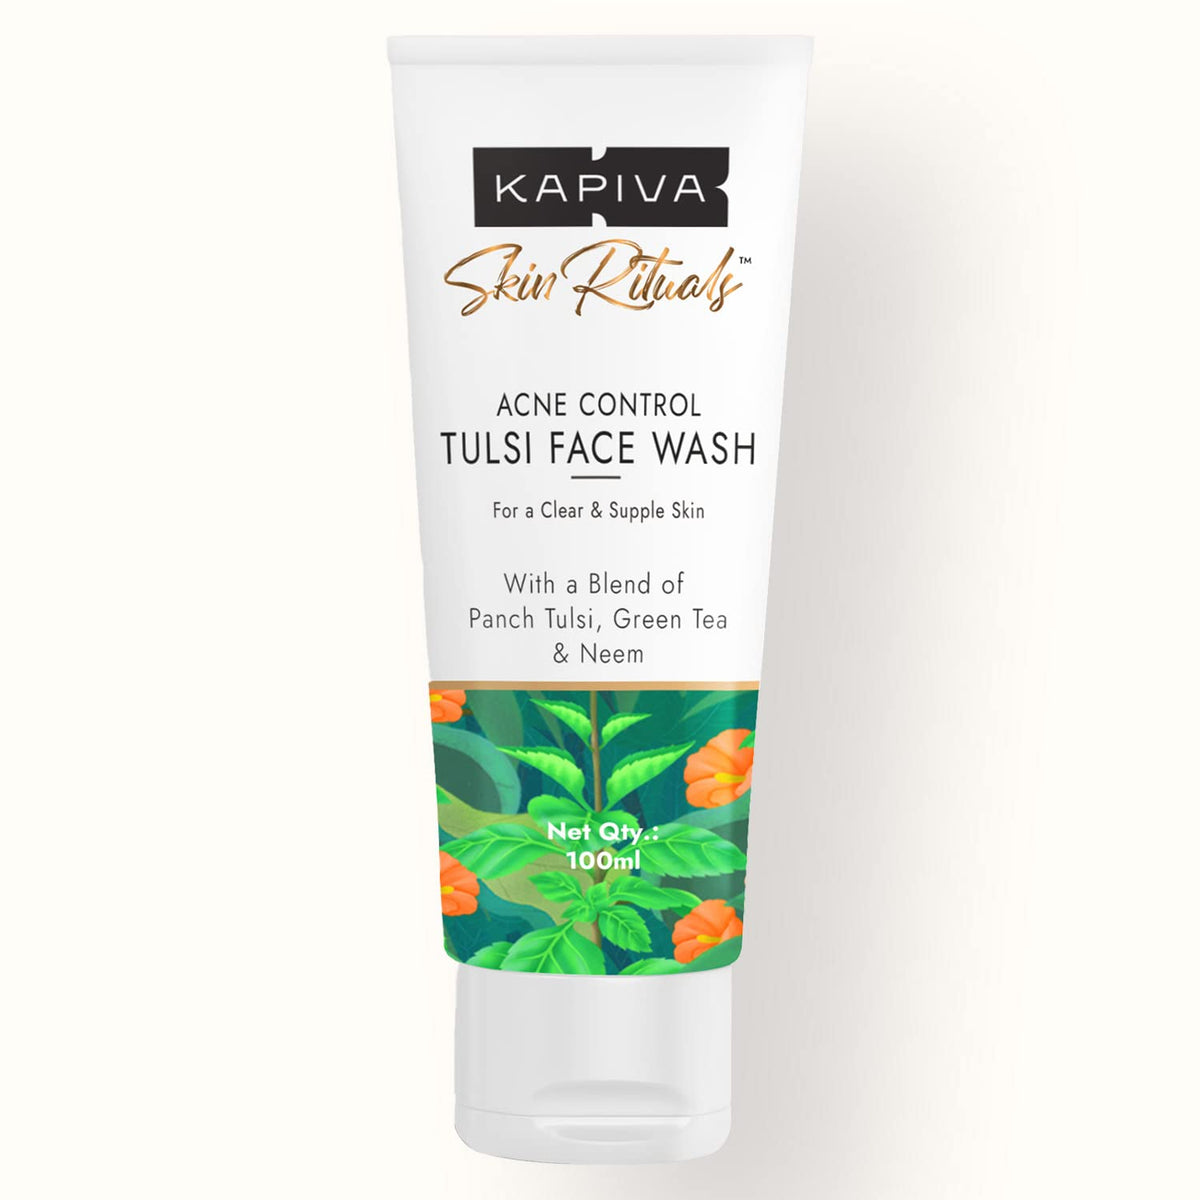 Kapiva Acne Control Tulsi Face Wash | Reduces Active Acne & Scars | For All Skin Types | 0% Parabens, Sulfates, Silicones